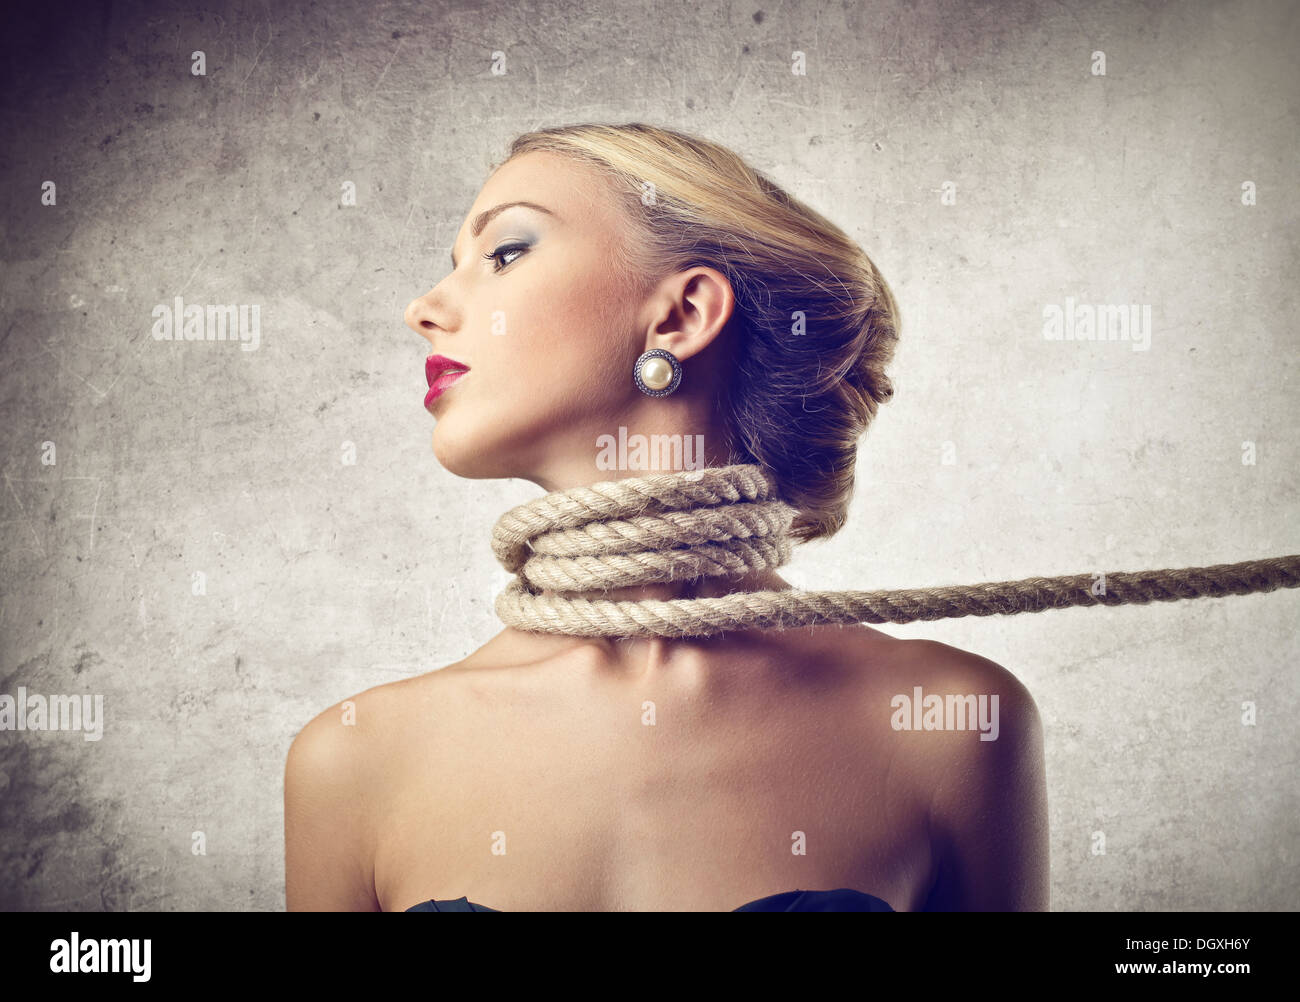 Beautiful blonde girl with a rope tied around the neck Stock Photo